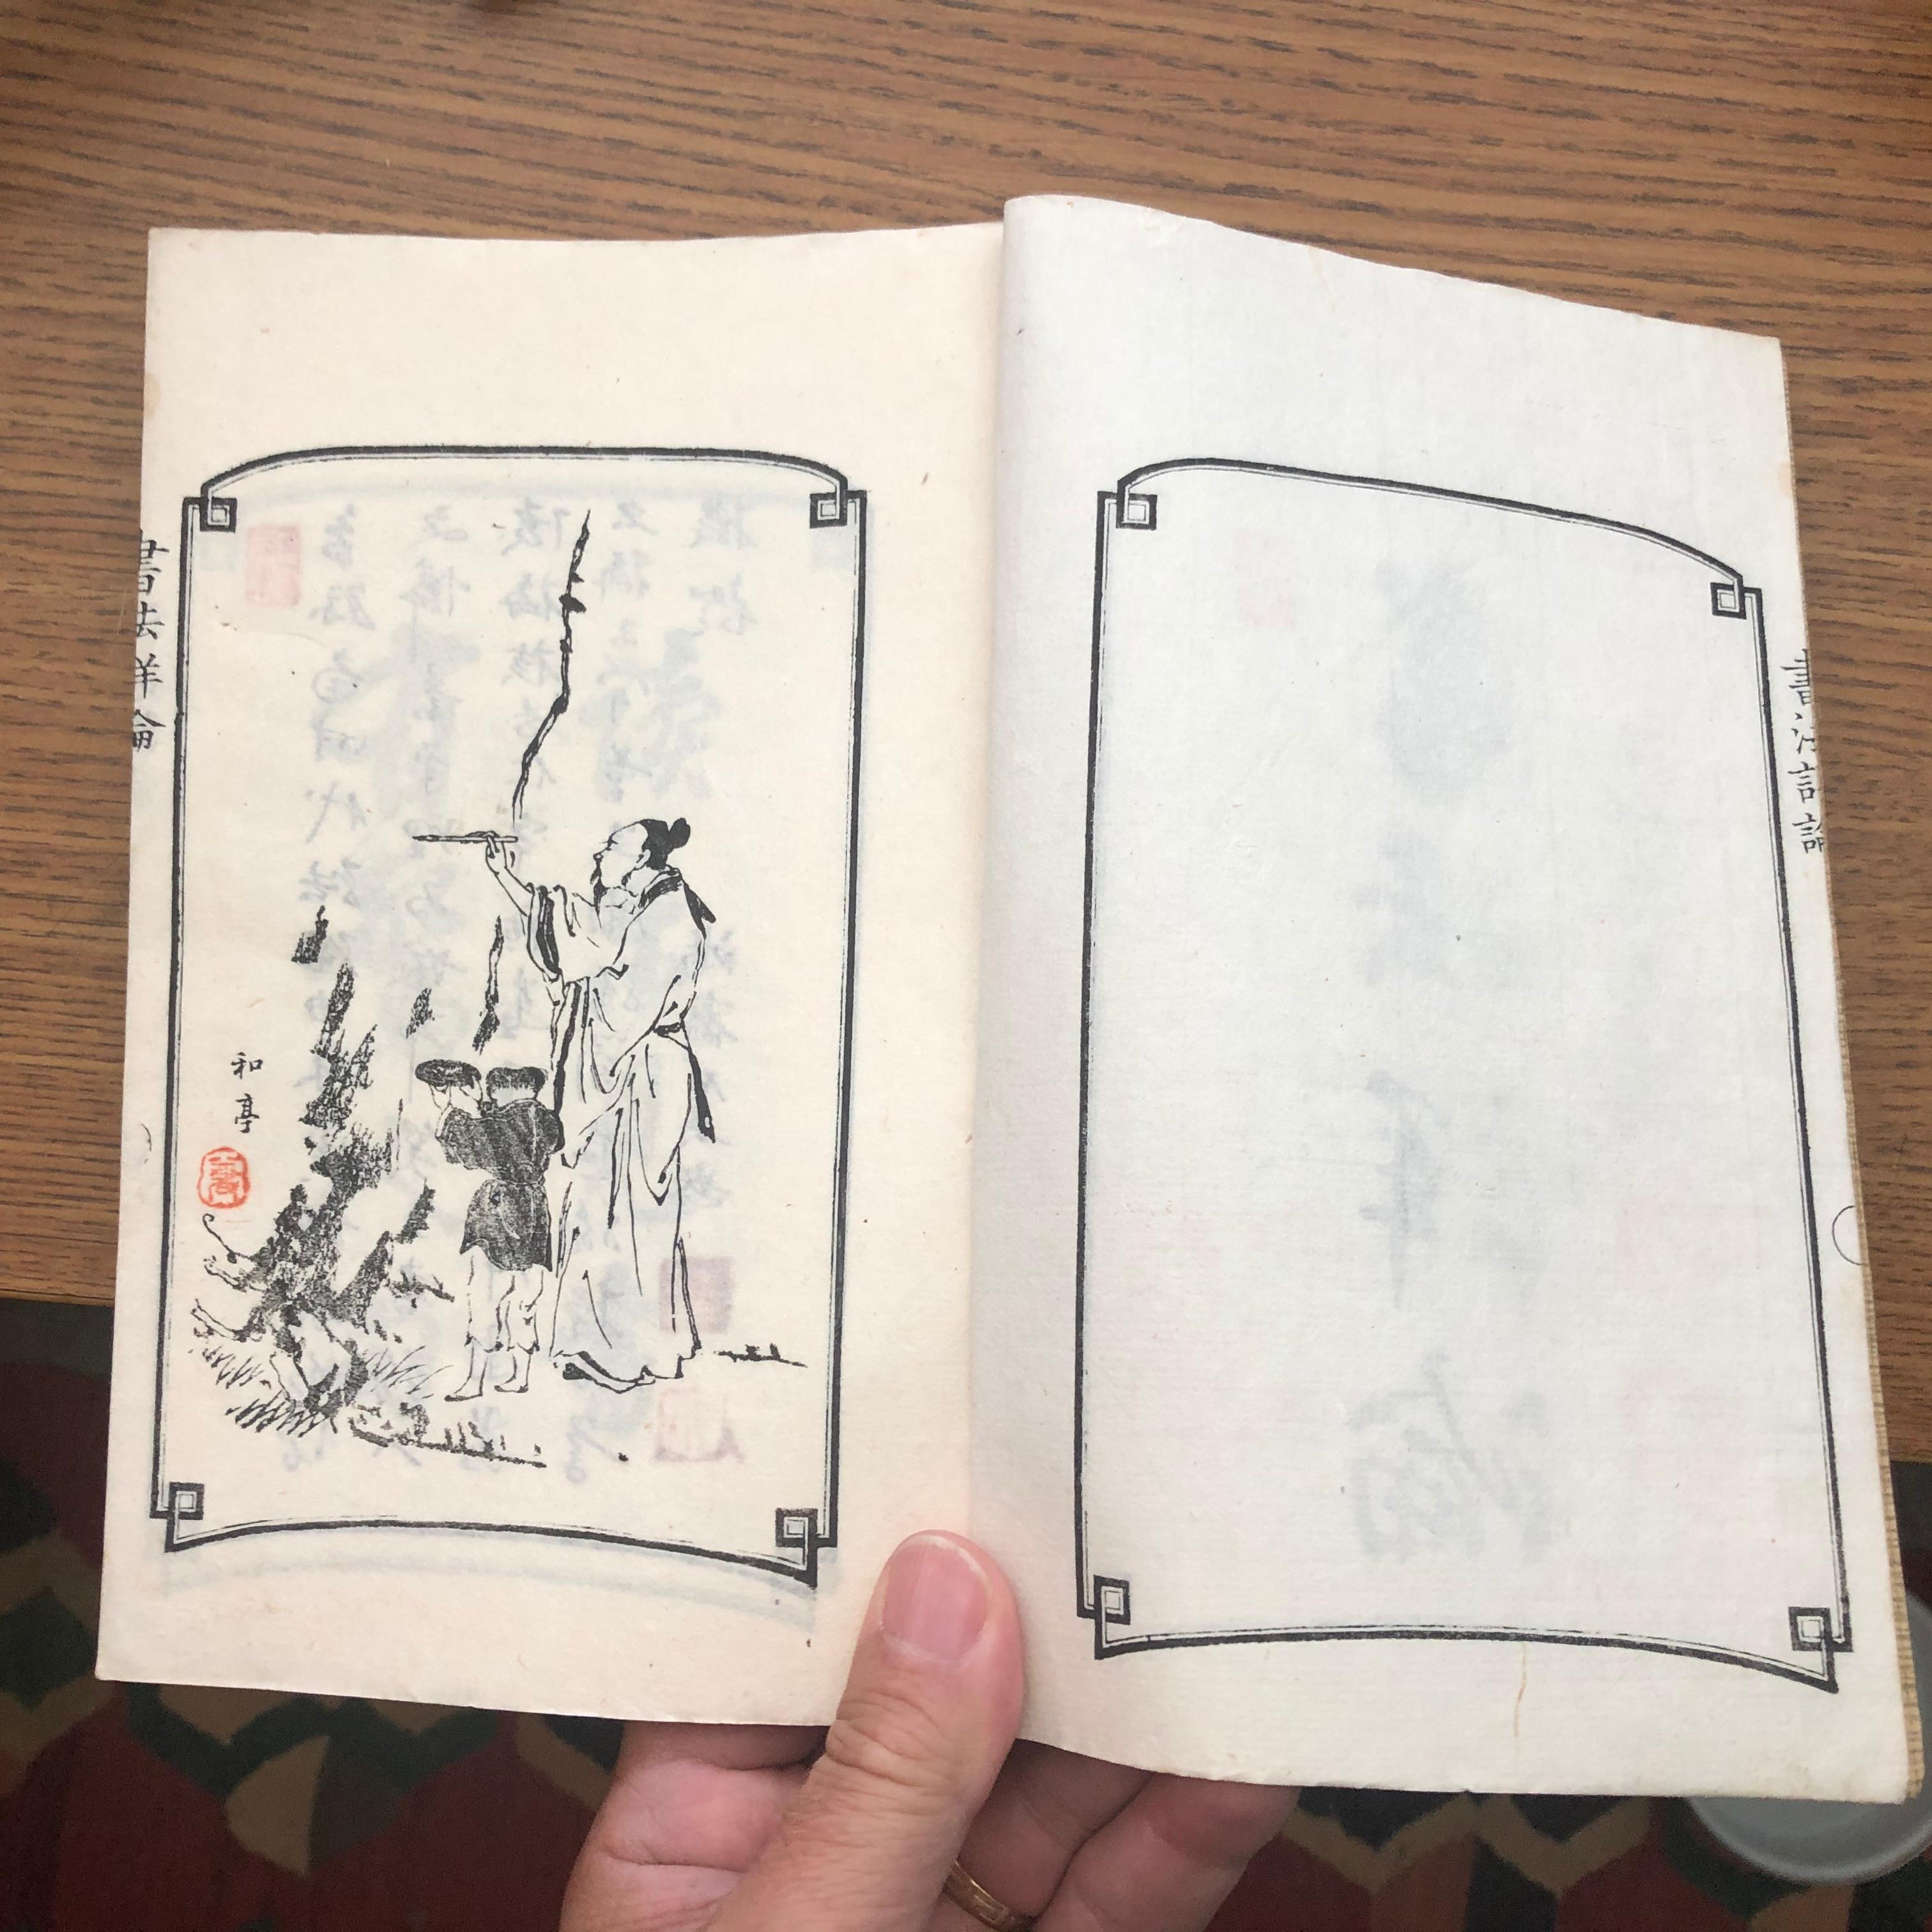 From our recent Japanese Acquisitions

We recently found this substantial 112 page calligraphy brushes book entitled Shohou Shoron by artist Ishikawa Kosai created in 1893, during the 19th century Meiji period (1868-1912). It details numerous